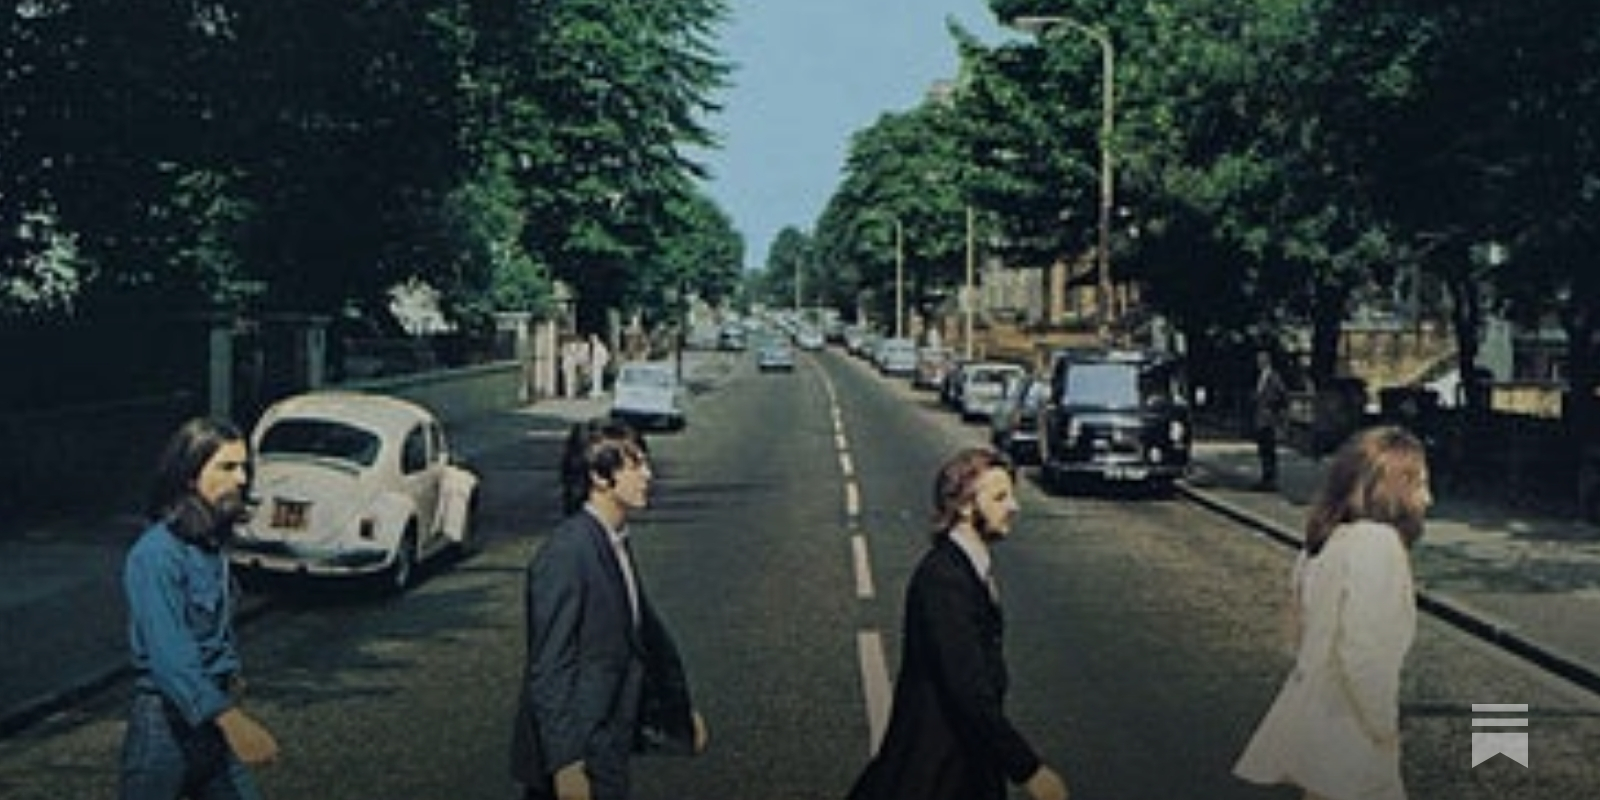 The story behind The Beatles' Abbey Road album cover - Radio X